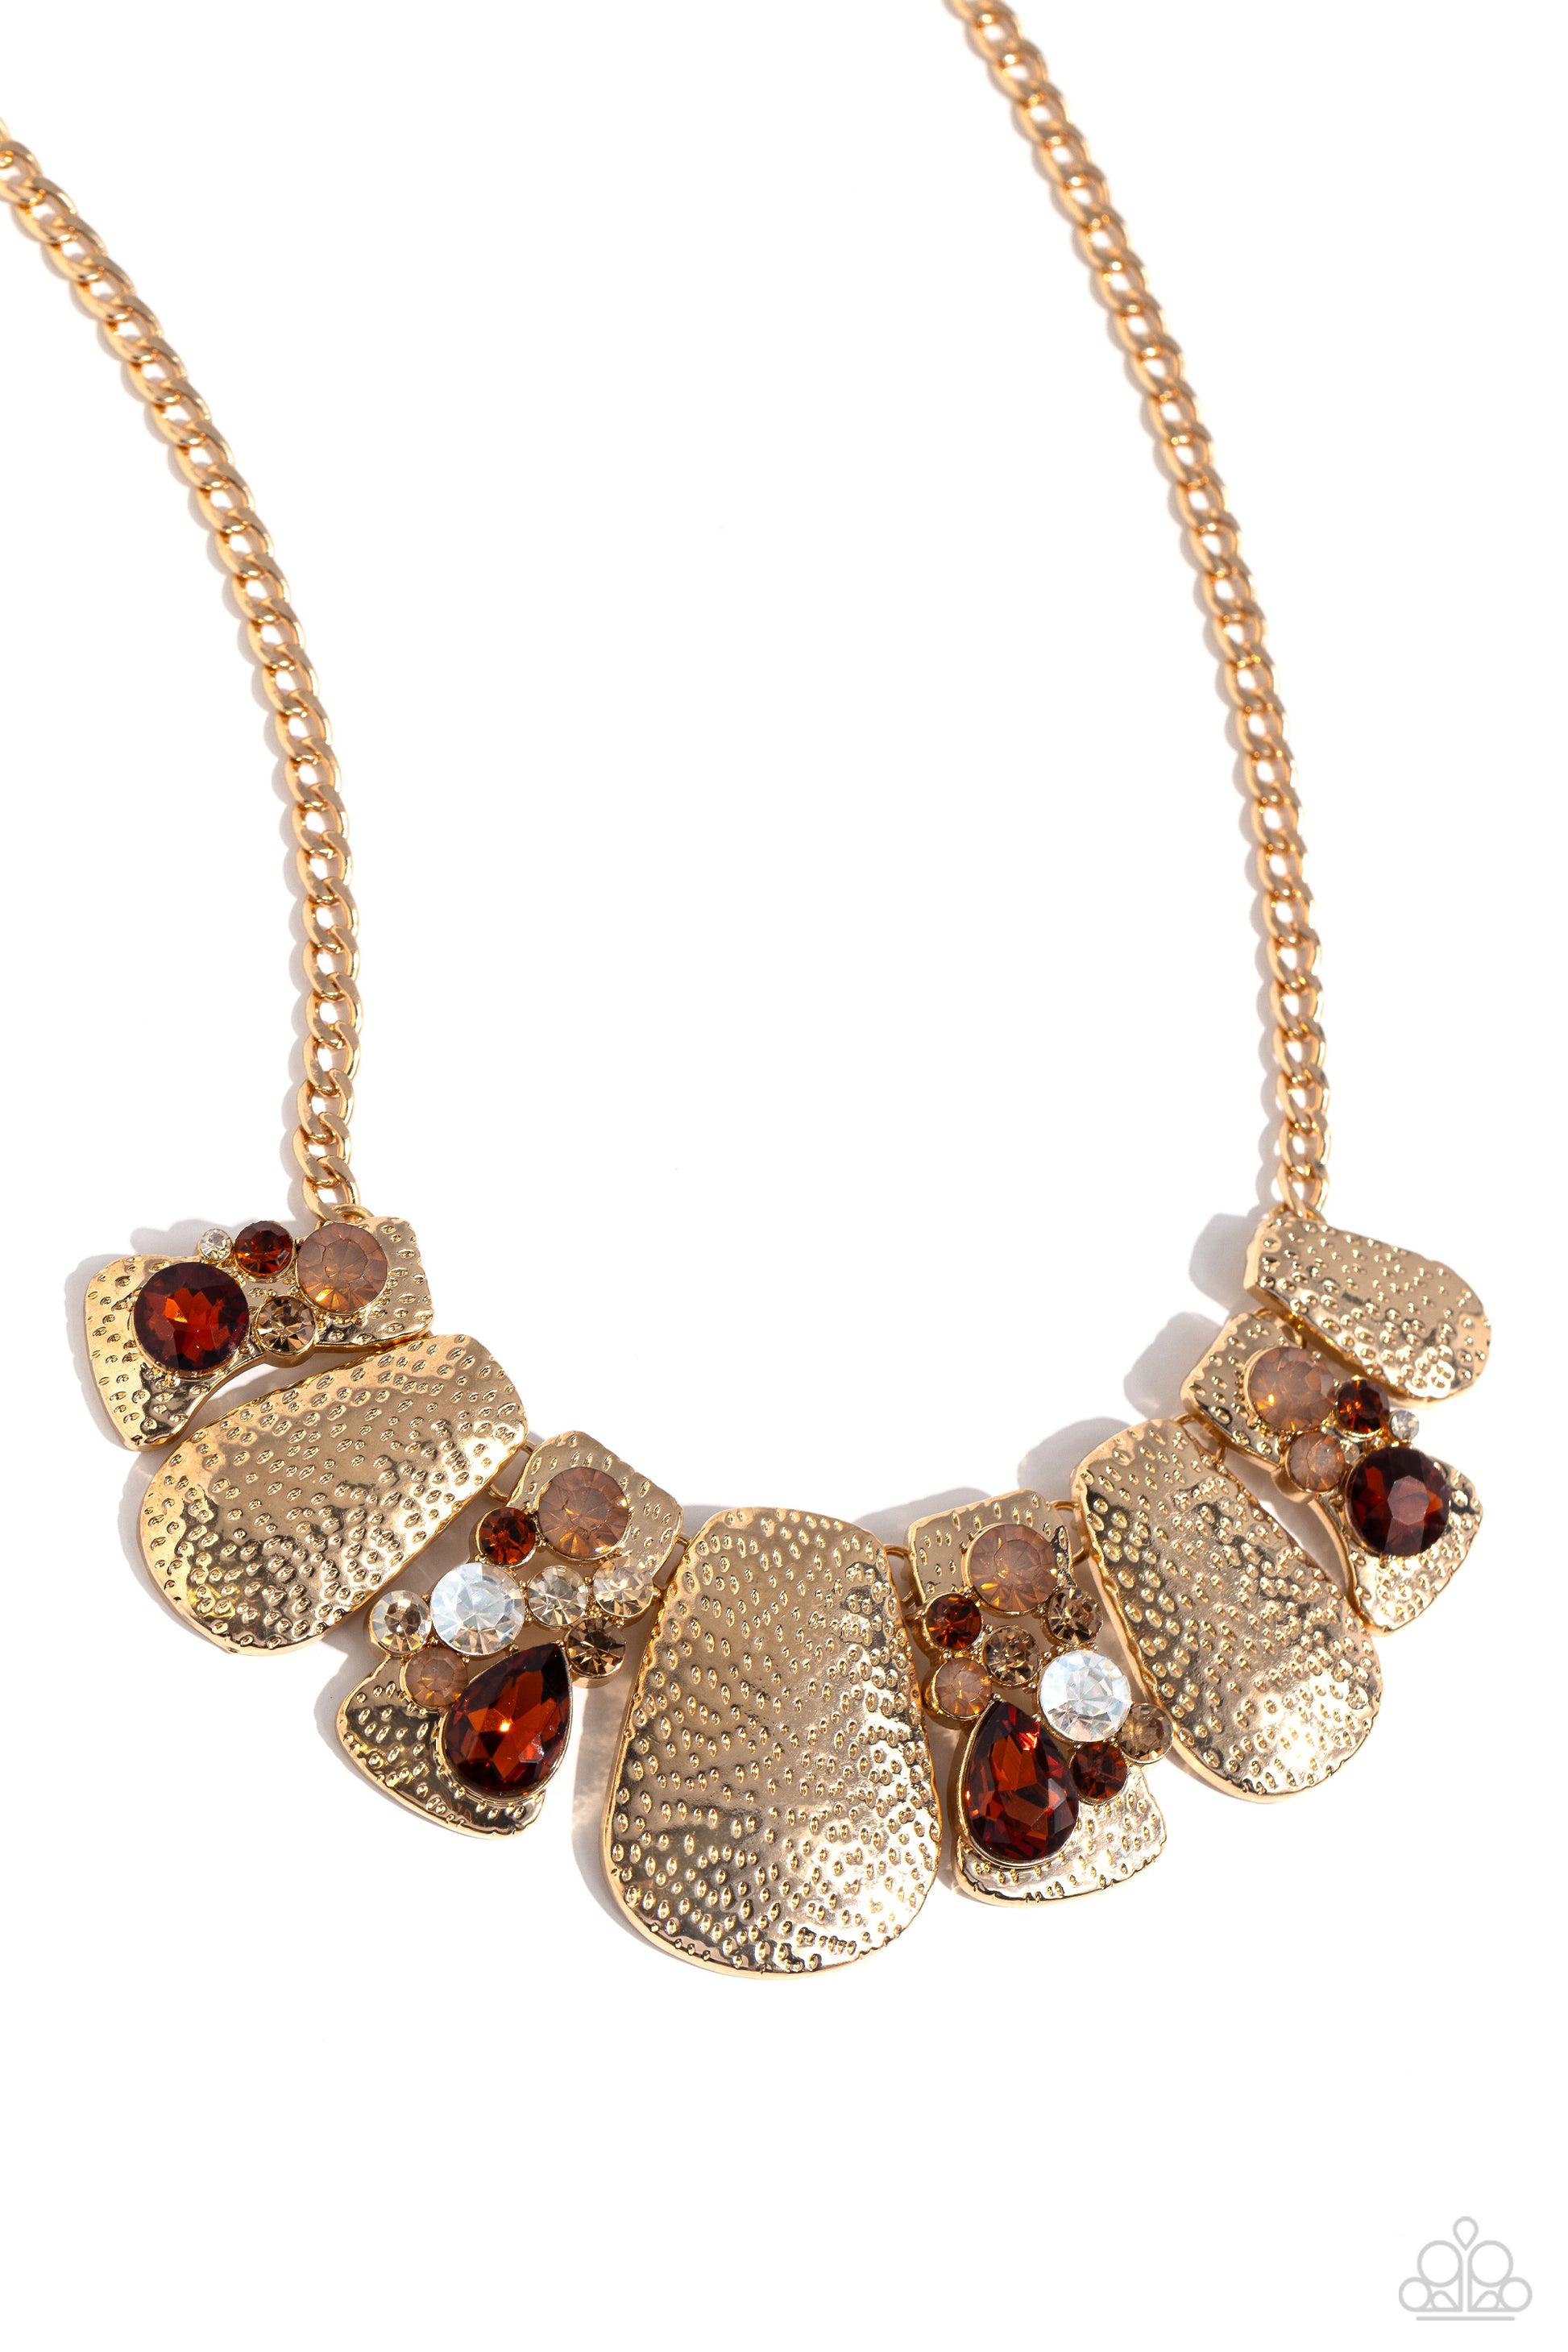 Multicolored Mayhem Brown Necklace - Paparazzi Accessories  A collection of hammered gold plates in various sizes delicately link below the collar, creating a boldly imperfect geometric fringe. Round and teardrop gems in various shades and sizes adorn every other frame in a haphazard pattern for an explosion of sparkle. Features an adjustable clasp closure. Due to its prismatic palette, color may vary.  Sold as one individual necklace. Includes one pair of matching earrings.  SKU: P2ST-BNXX-086XX